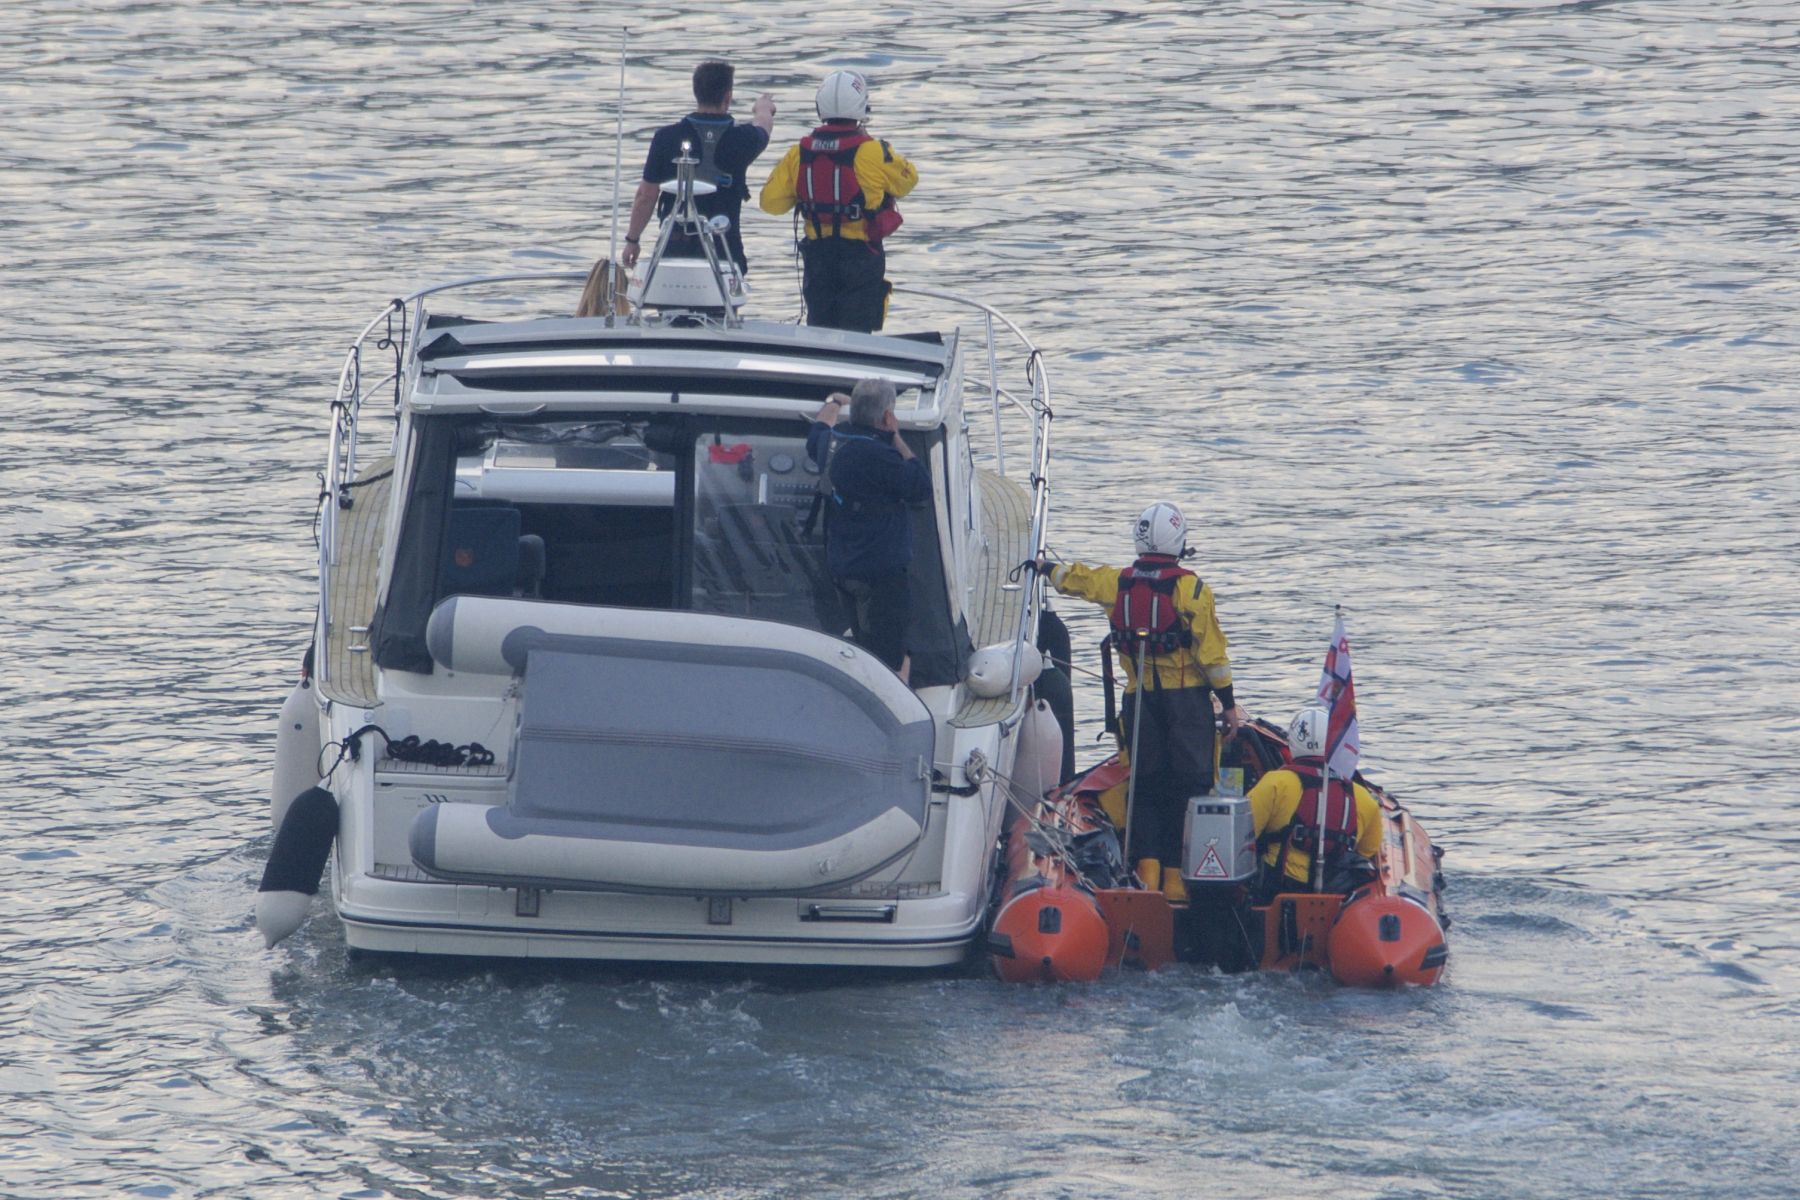 RNLI Dart lifeboat brought the 31 ft motor cruiser back to Dartmouth.